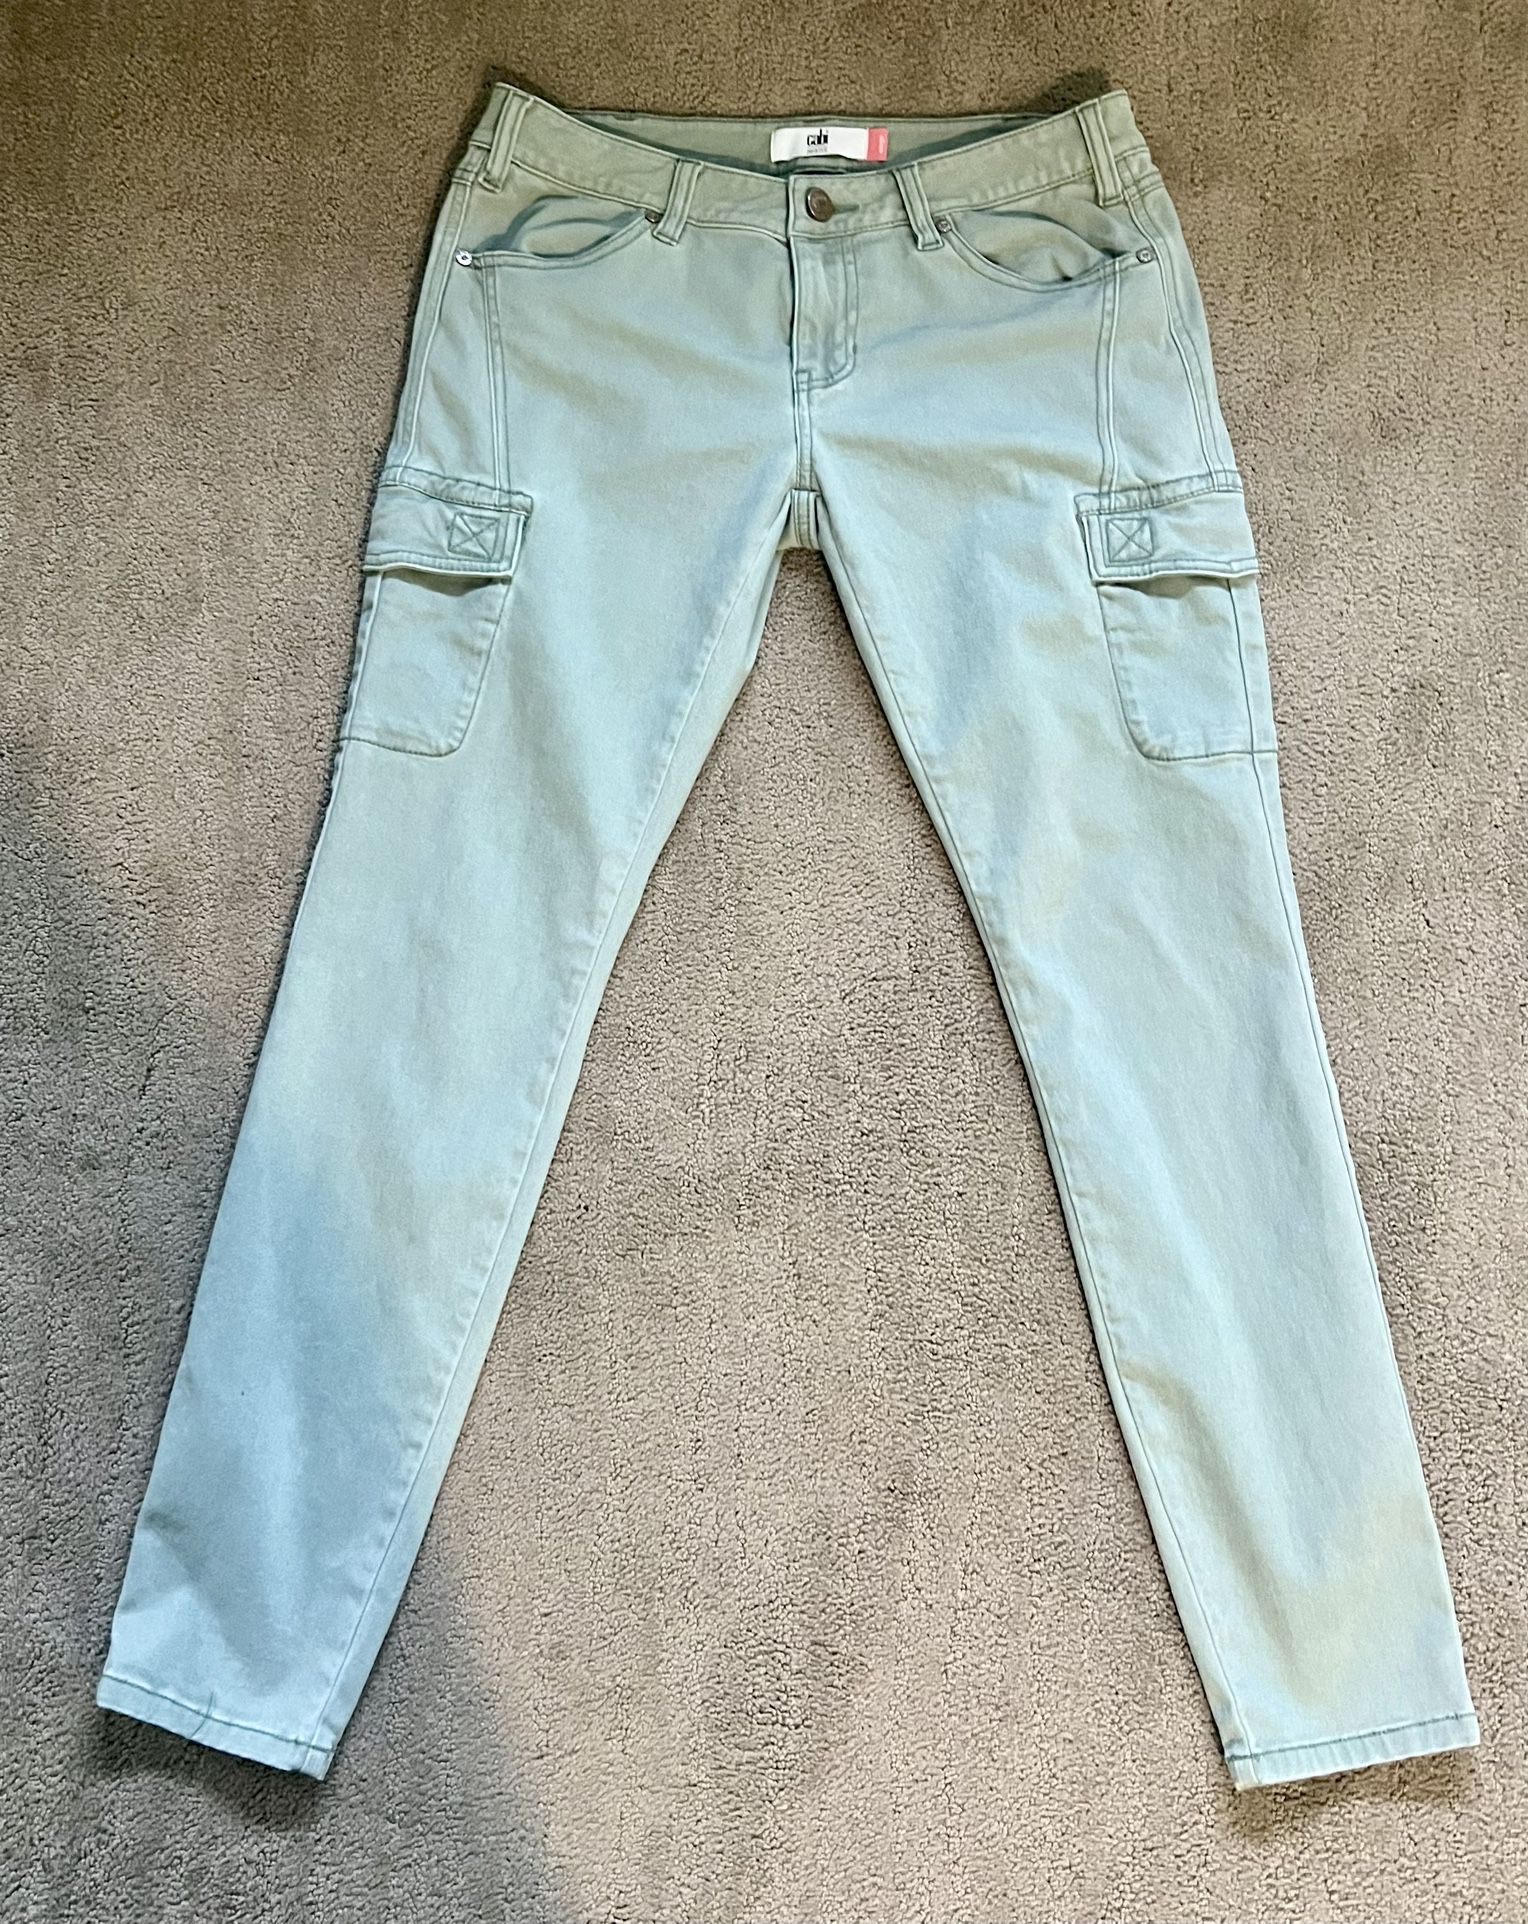   Cabi Celadon green cargo skinny jeans  Zip  Sz 6 with button. Stretchy  Front/side/back pockets  Size 6  Pre-owned and in great condi